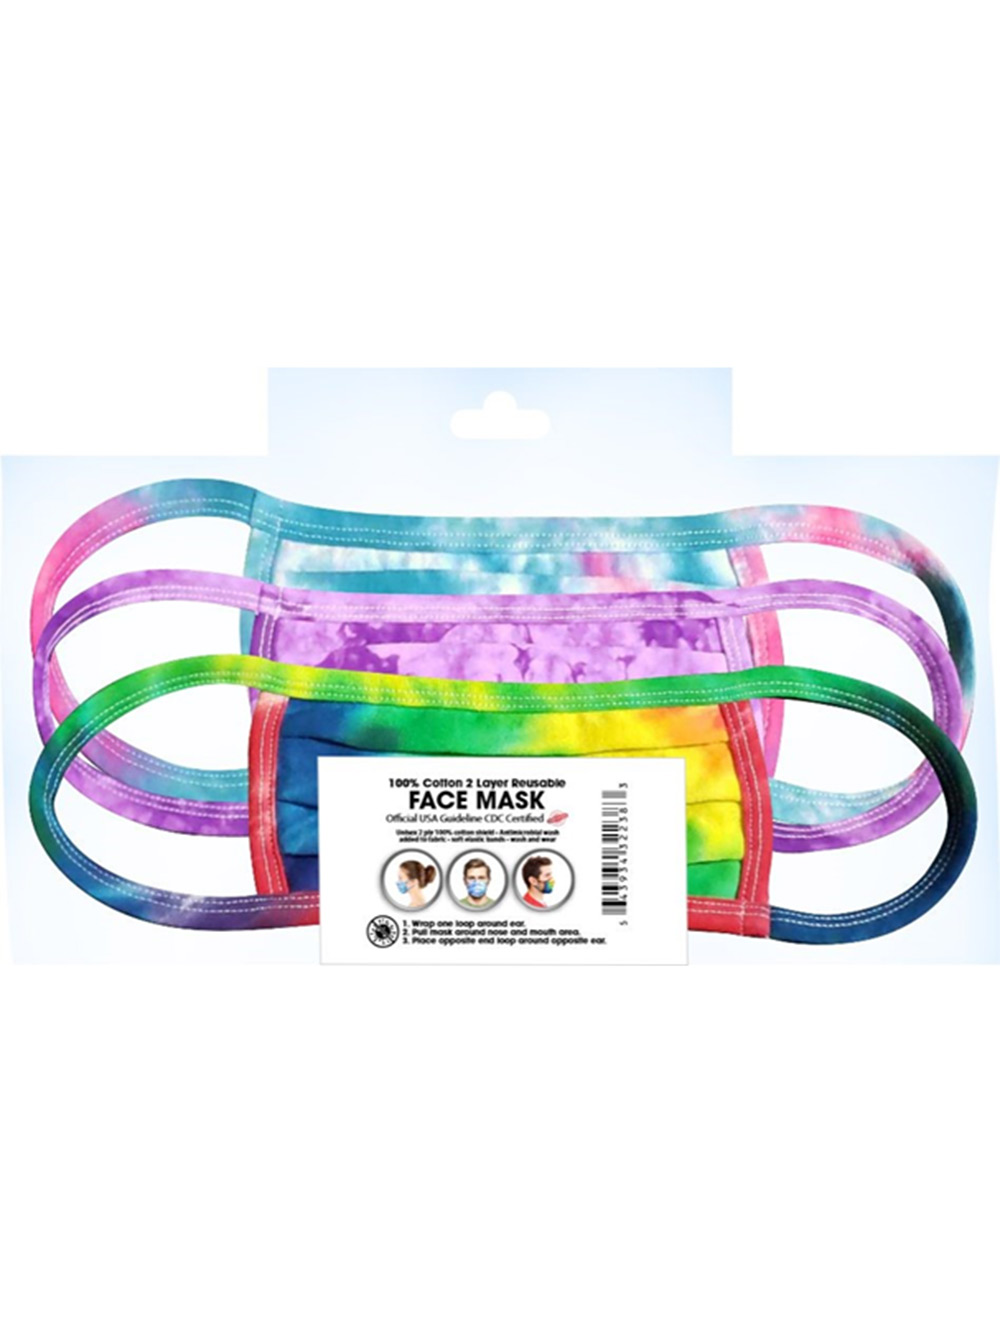 5-Pack Real Tie-Dye 100% Cotton 2 Layer Reusable Face Mask - one color, one size - image 1 of 2